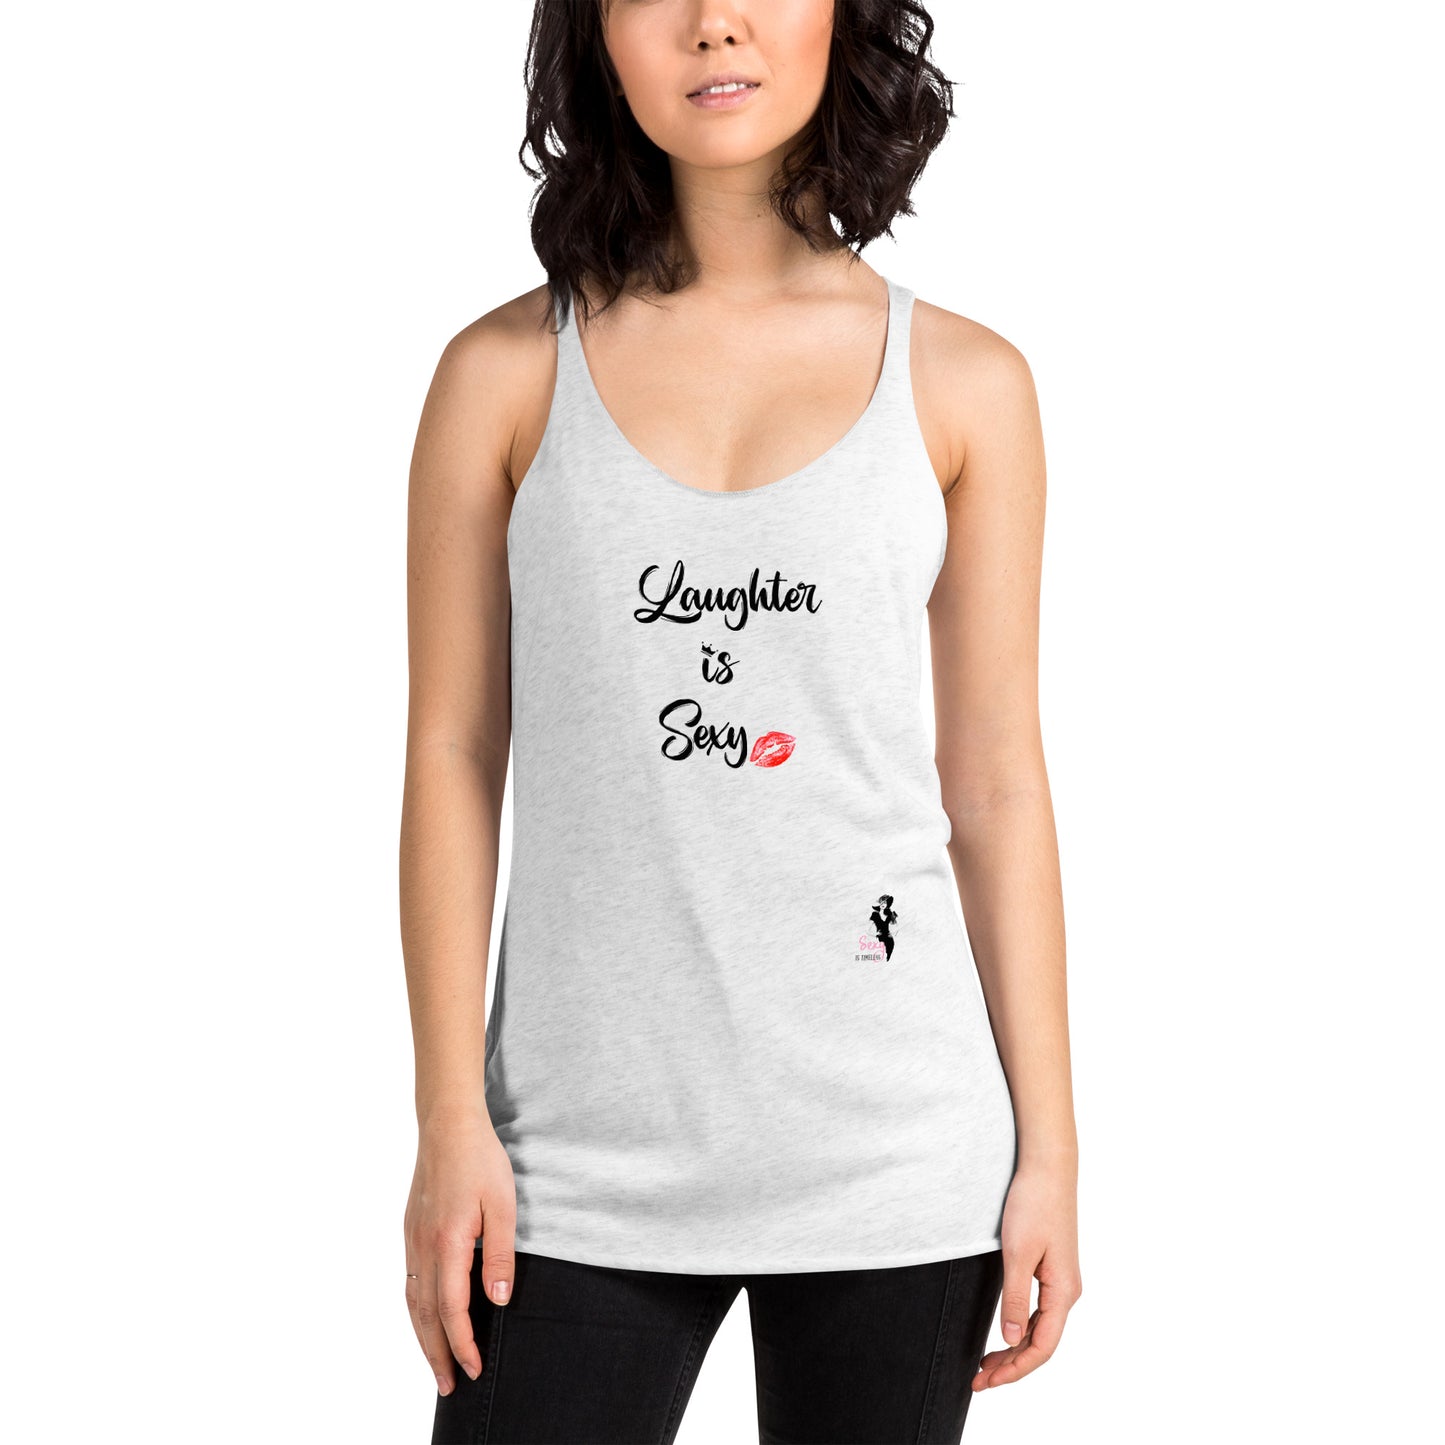 Women's Racerback Tank - Laughter is Sexy